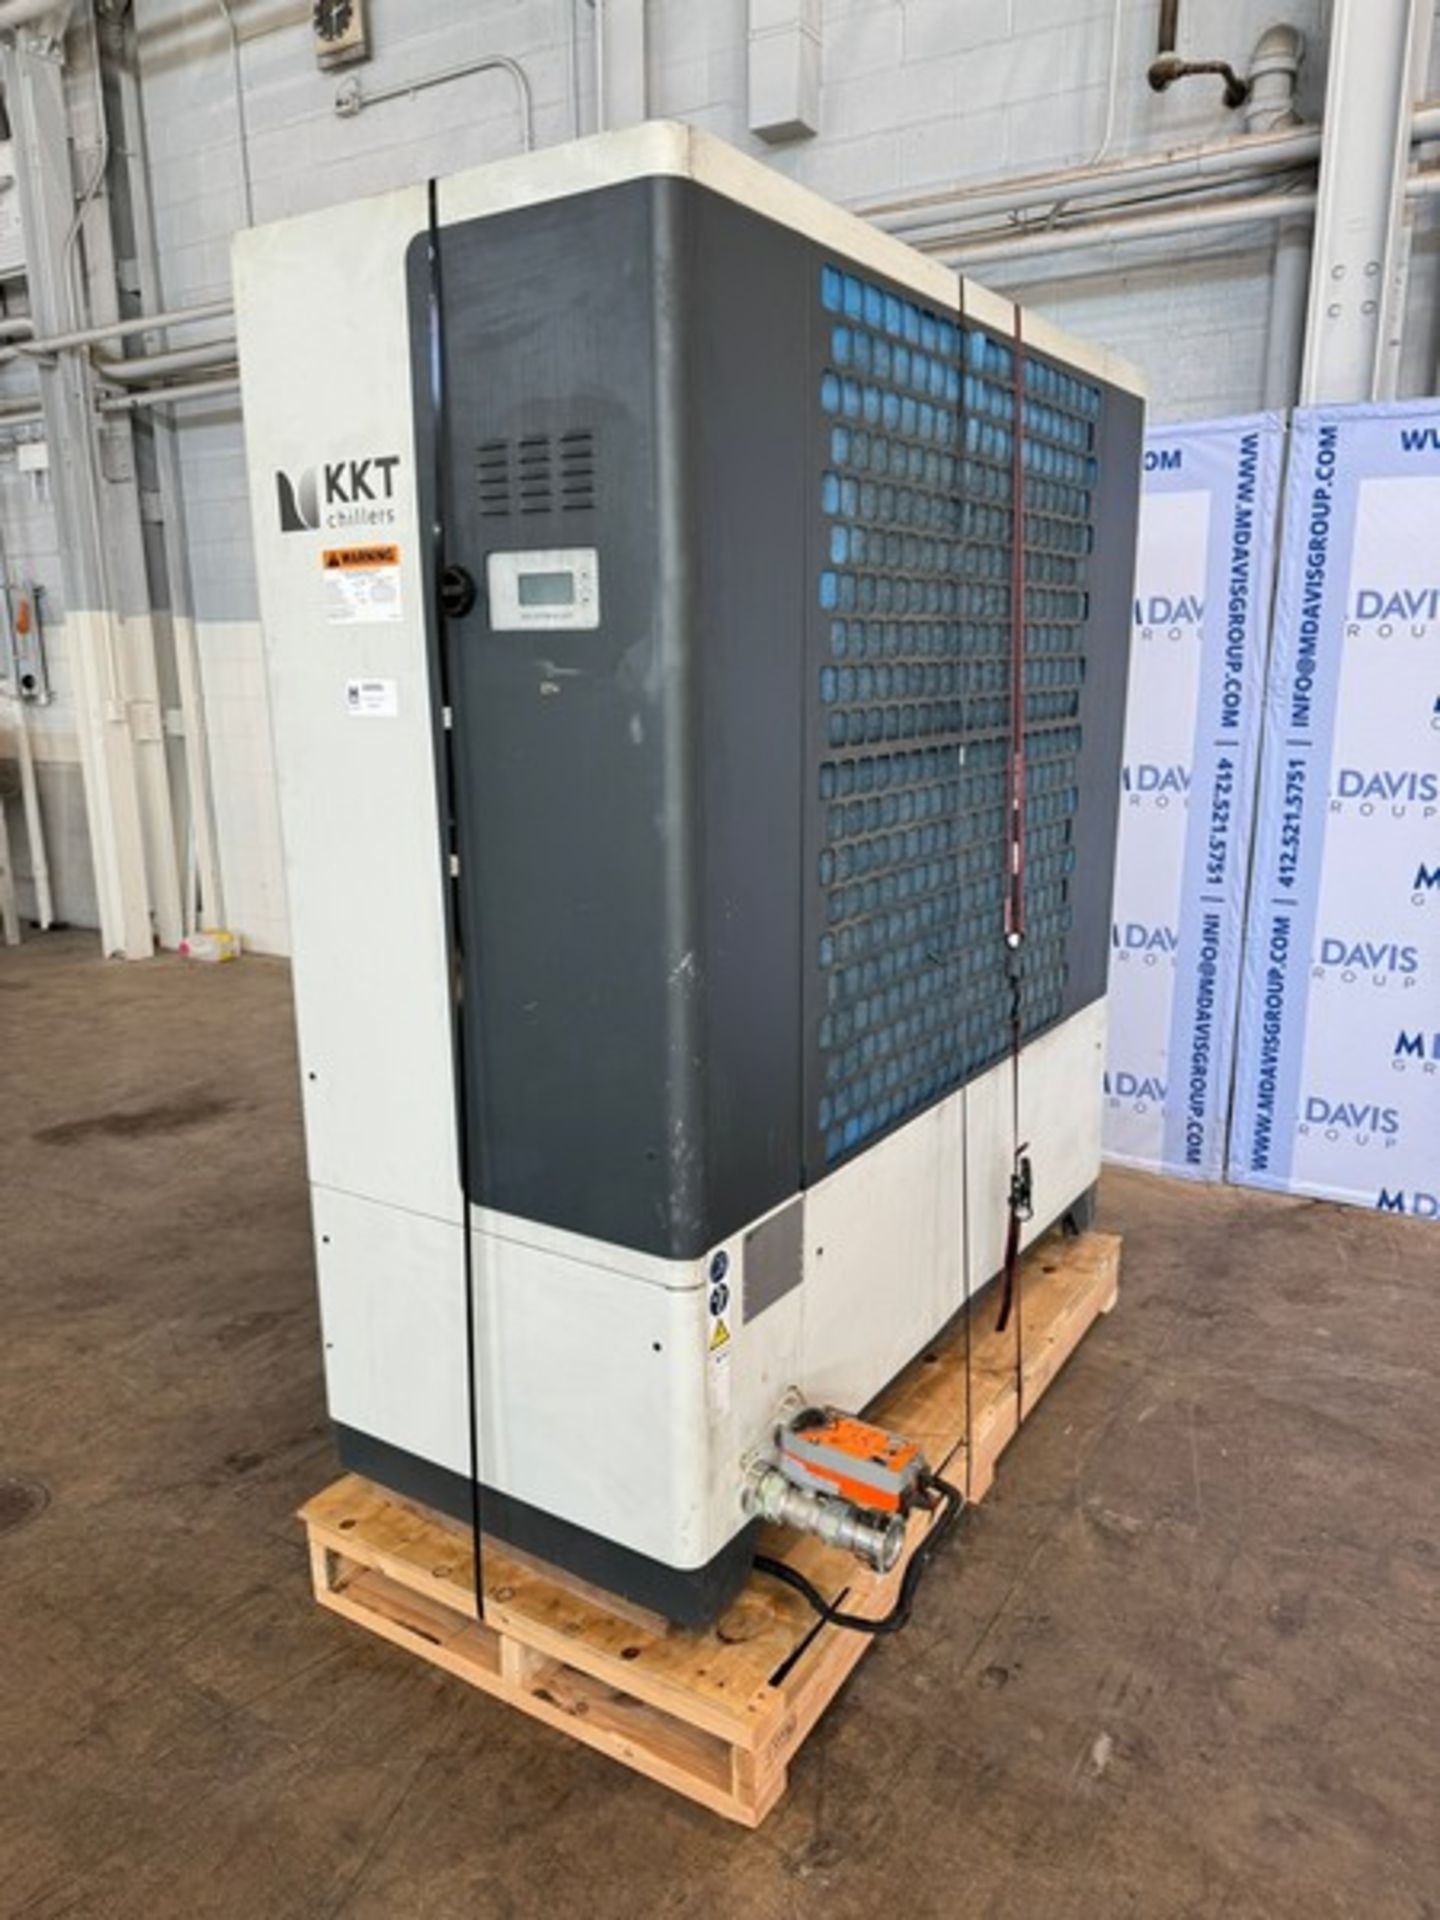 2017 KKT Chiller, Type: CBOXX90, S/N 90901498, 460 Volts, 3 Phase(INV#102931) (Located @ the MDG - Image 5 of 6